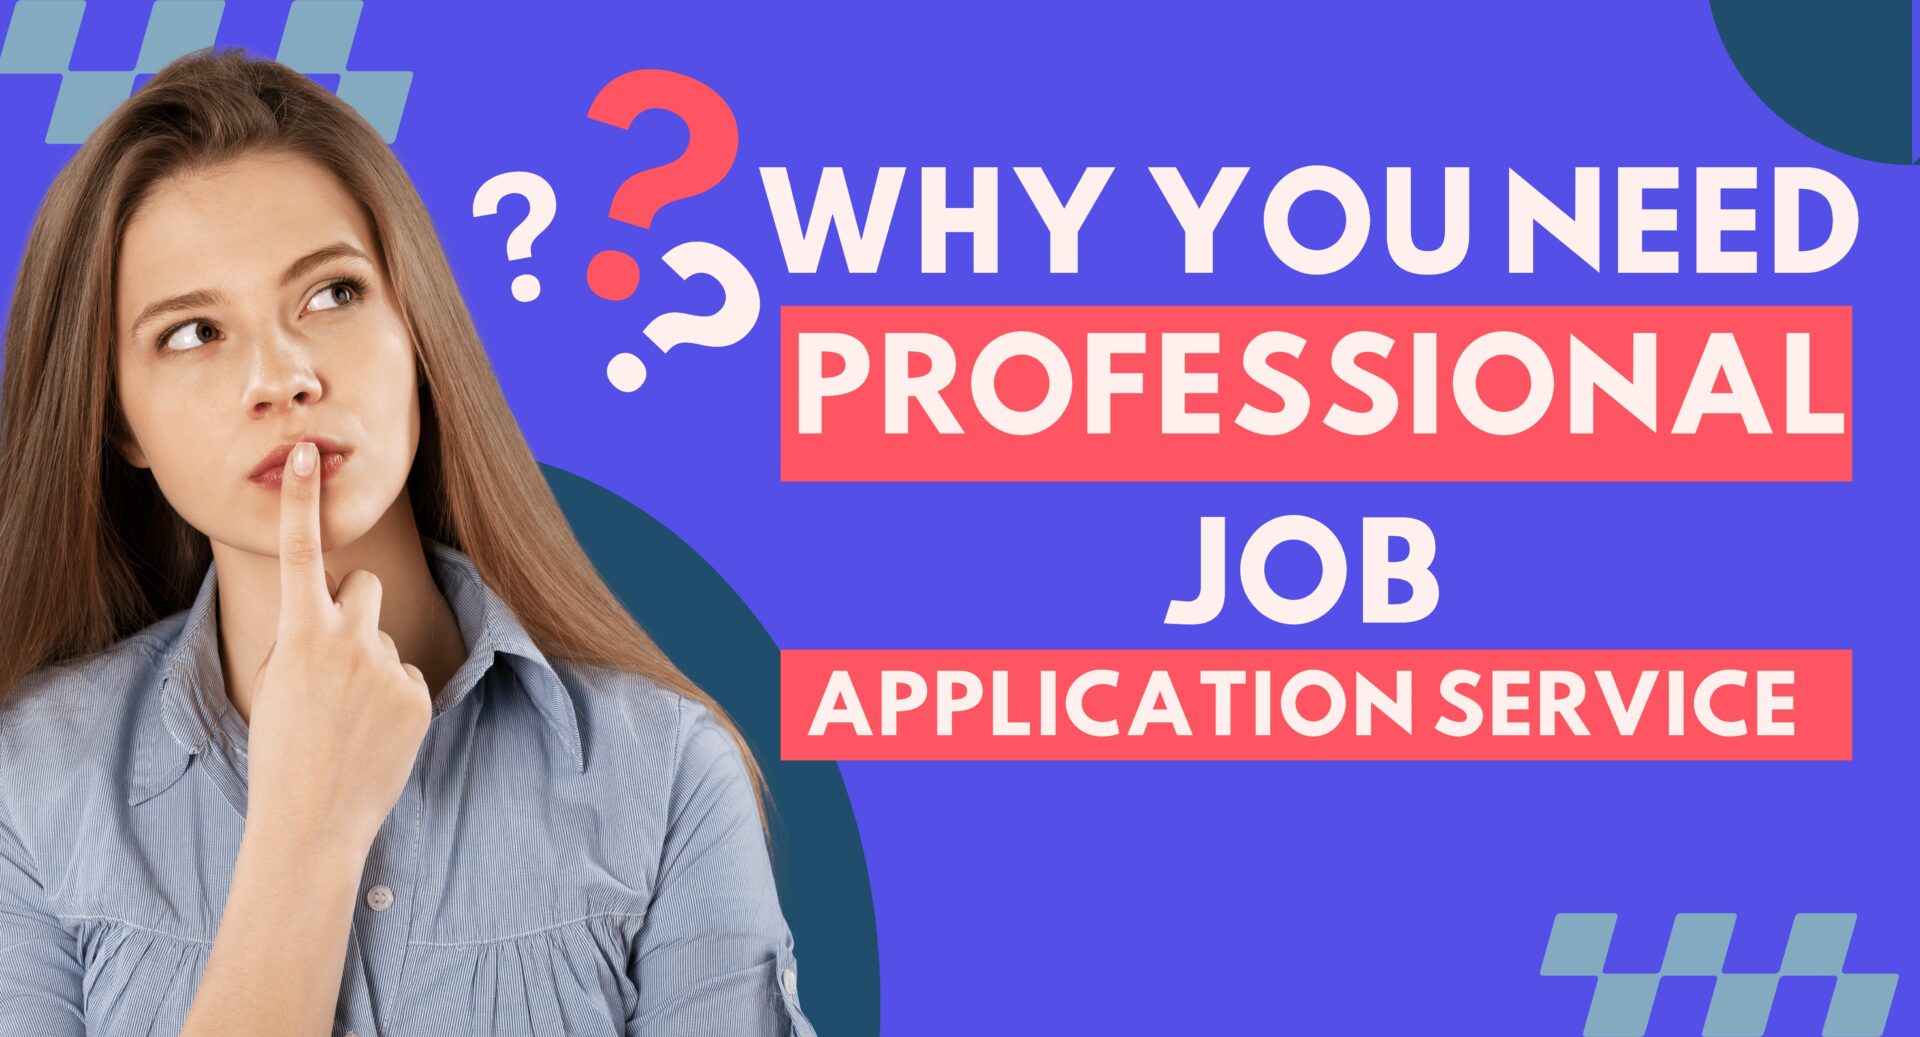 Maximizing Job Search Efforts: Why You Need a Professional Job Application Service